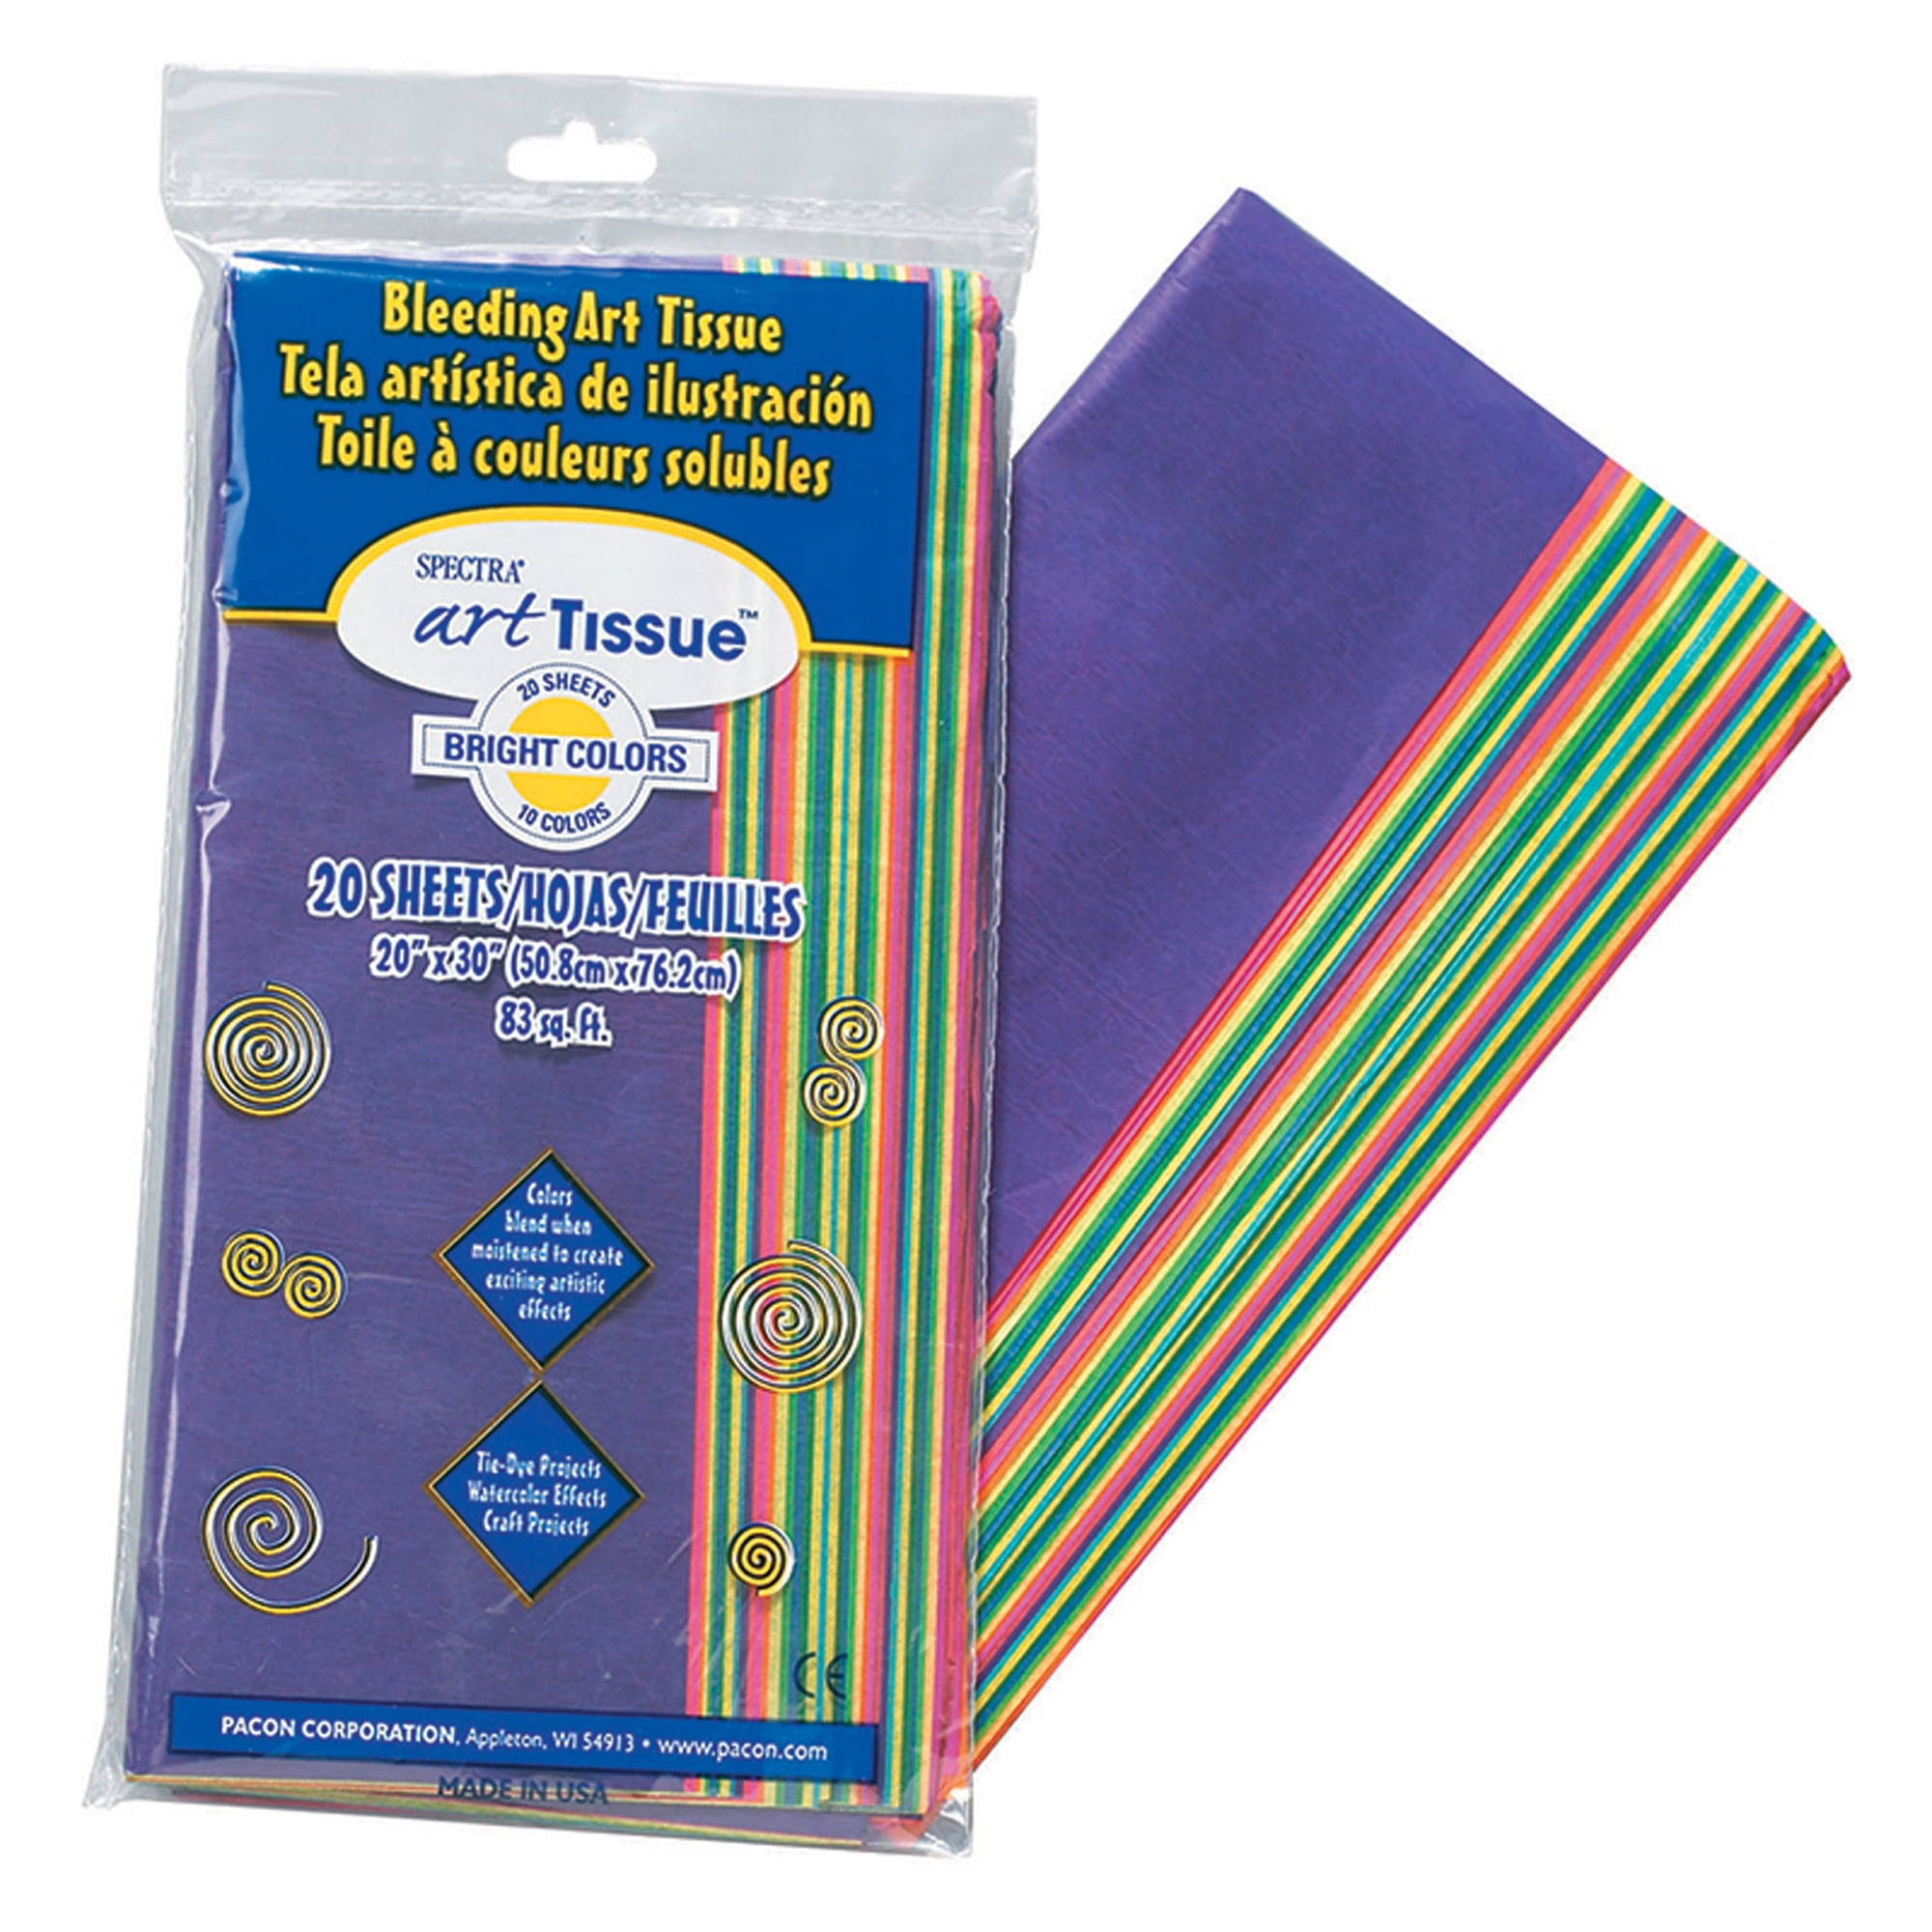  Hygloss Products Bleeding Tissue Paper Squares 1-Inch